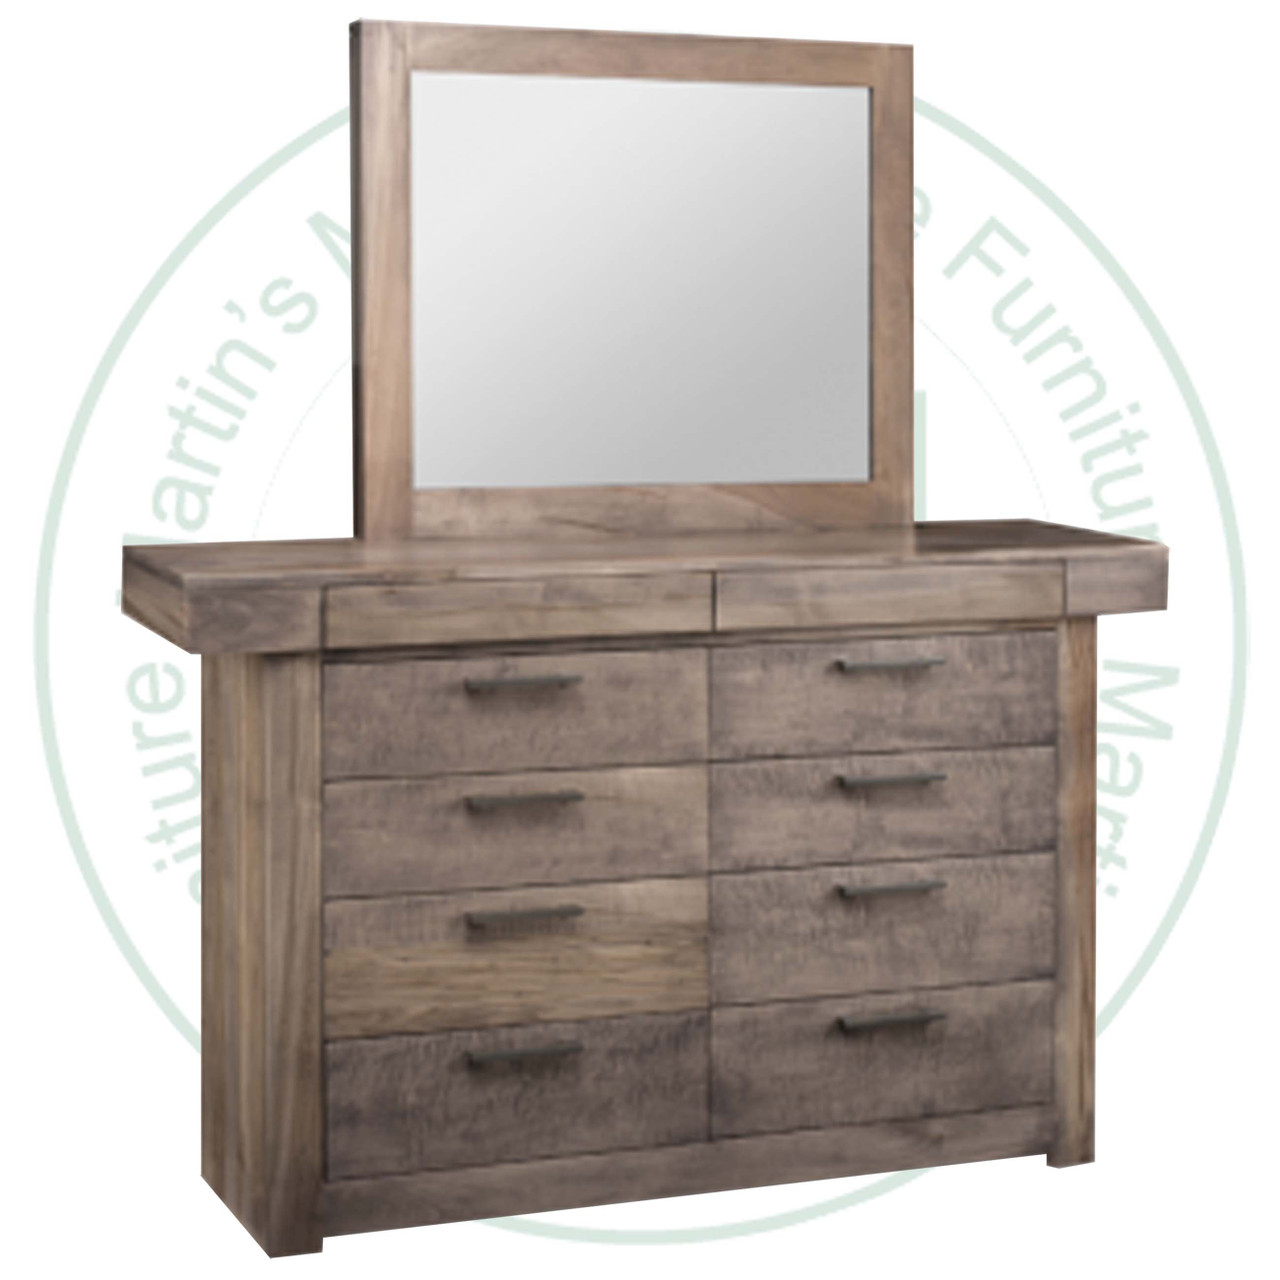 Maple Baxter Double Dresser 19''D x 69''W x 43.5''H With 10 Drawers